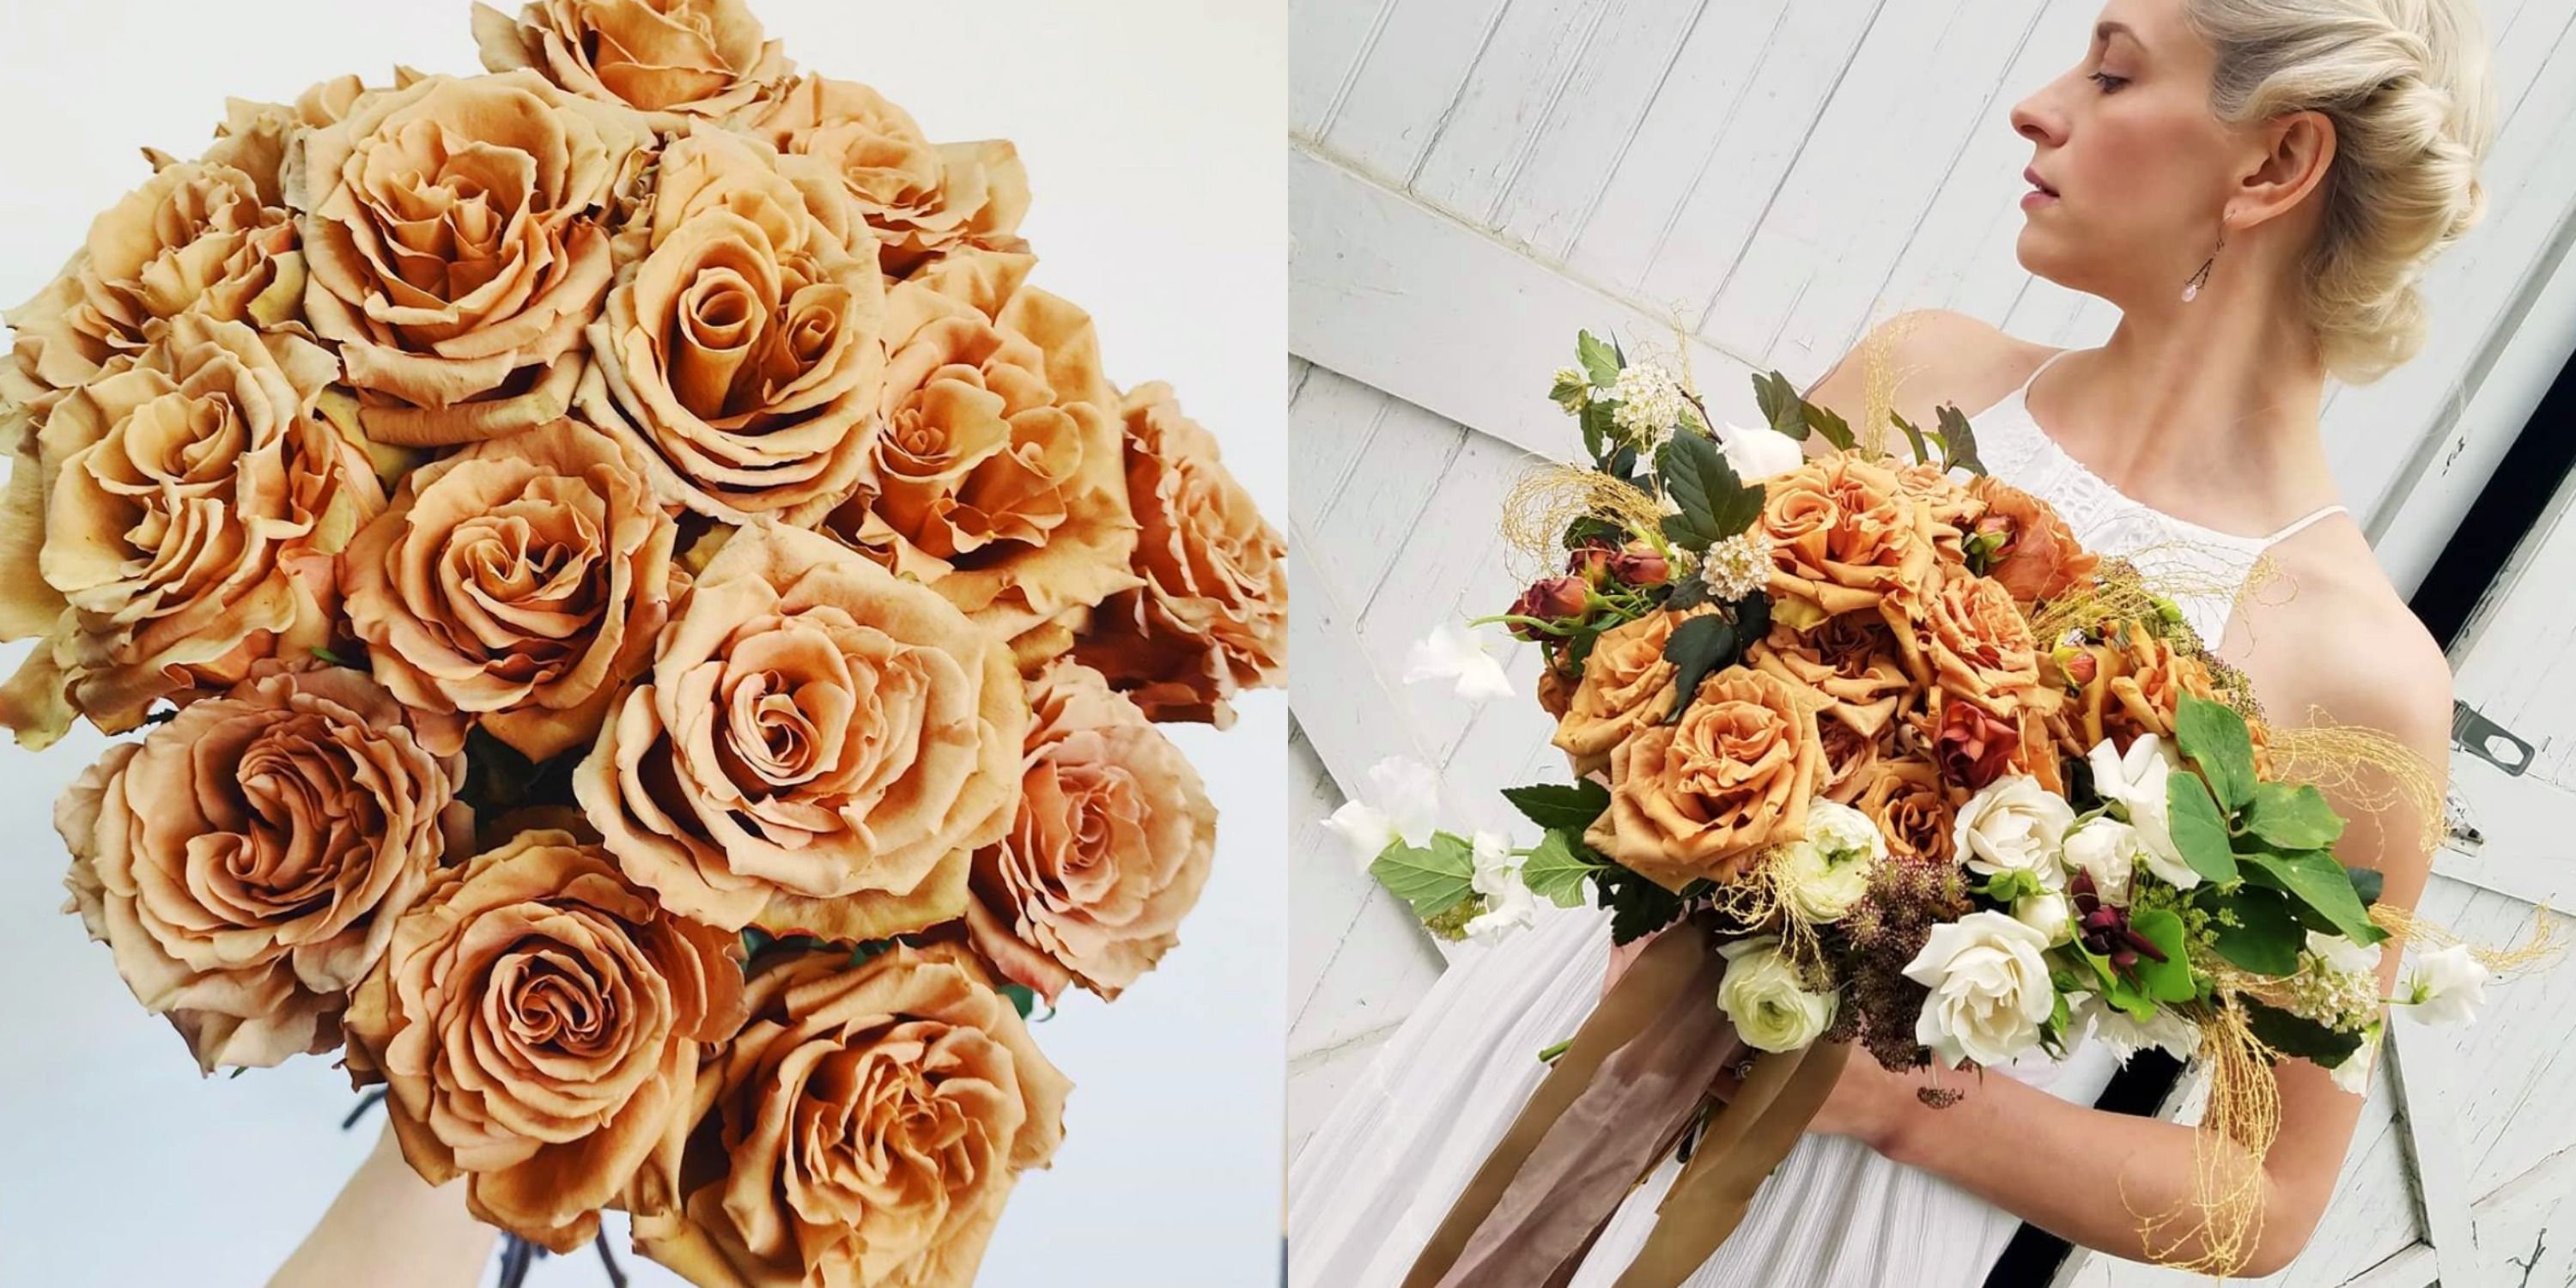 Toffee rose bouquet with chiffon ribbon